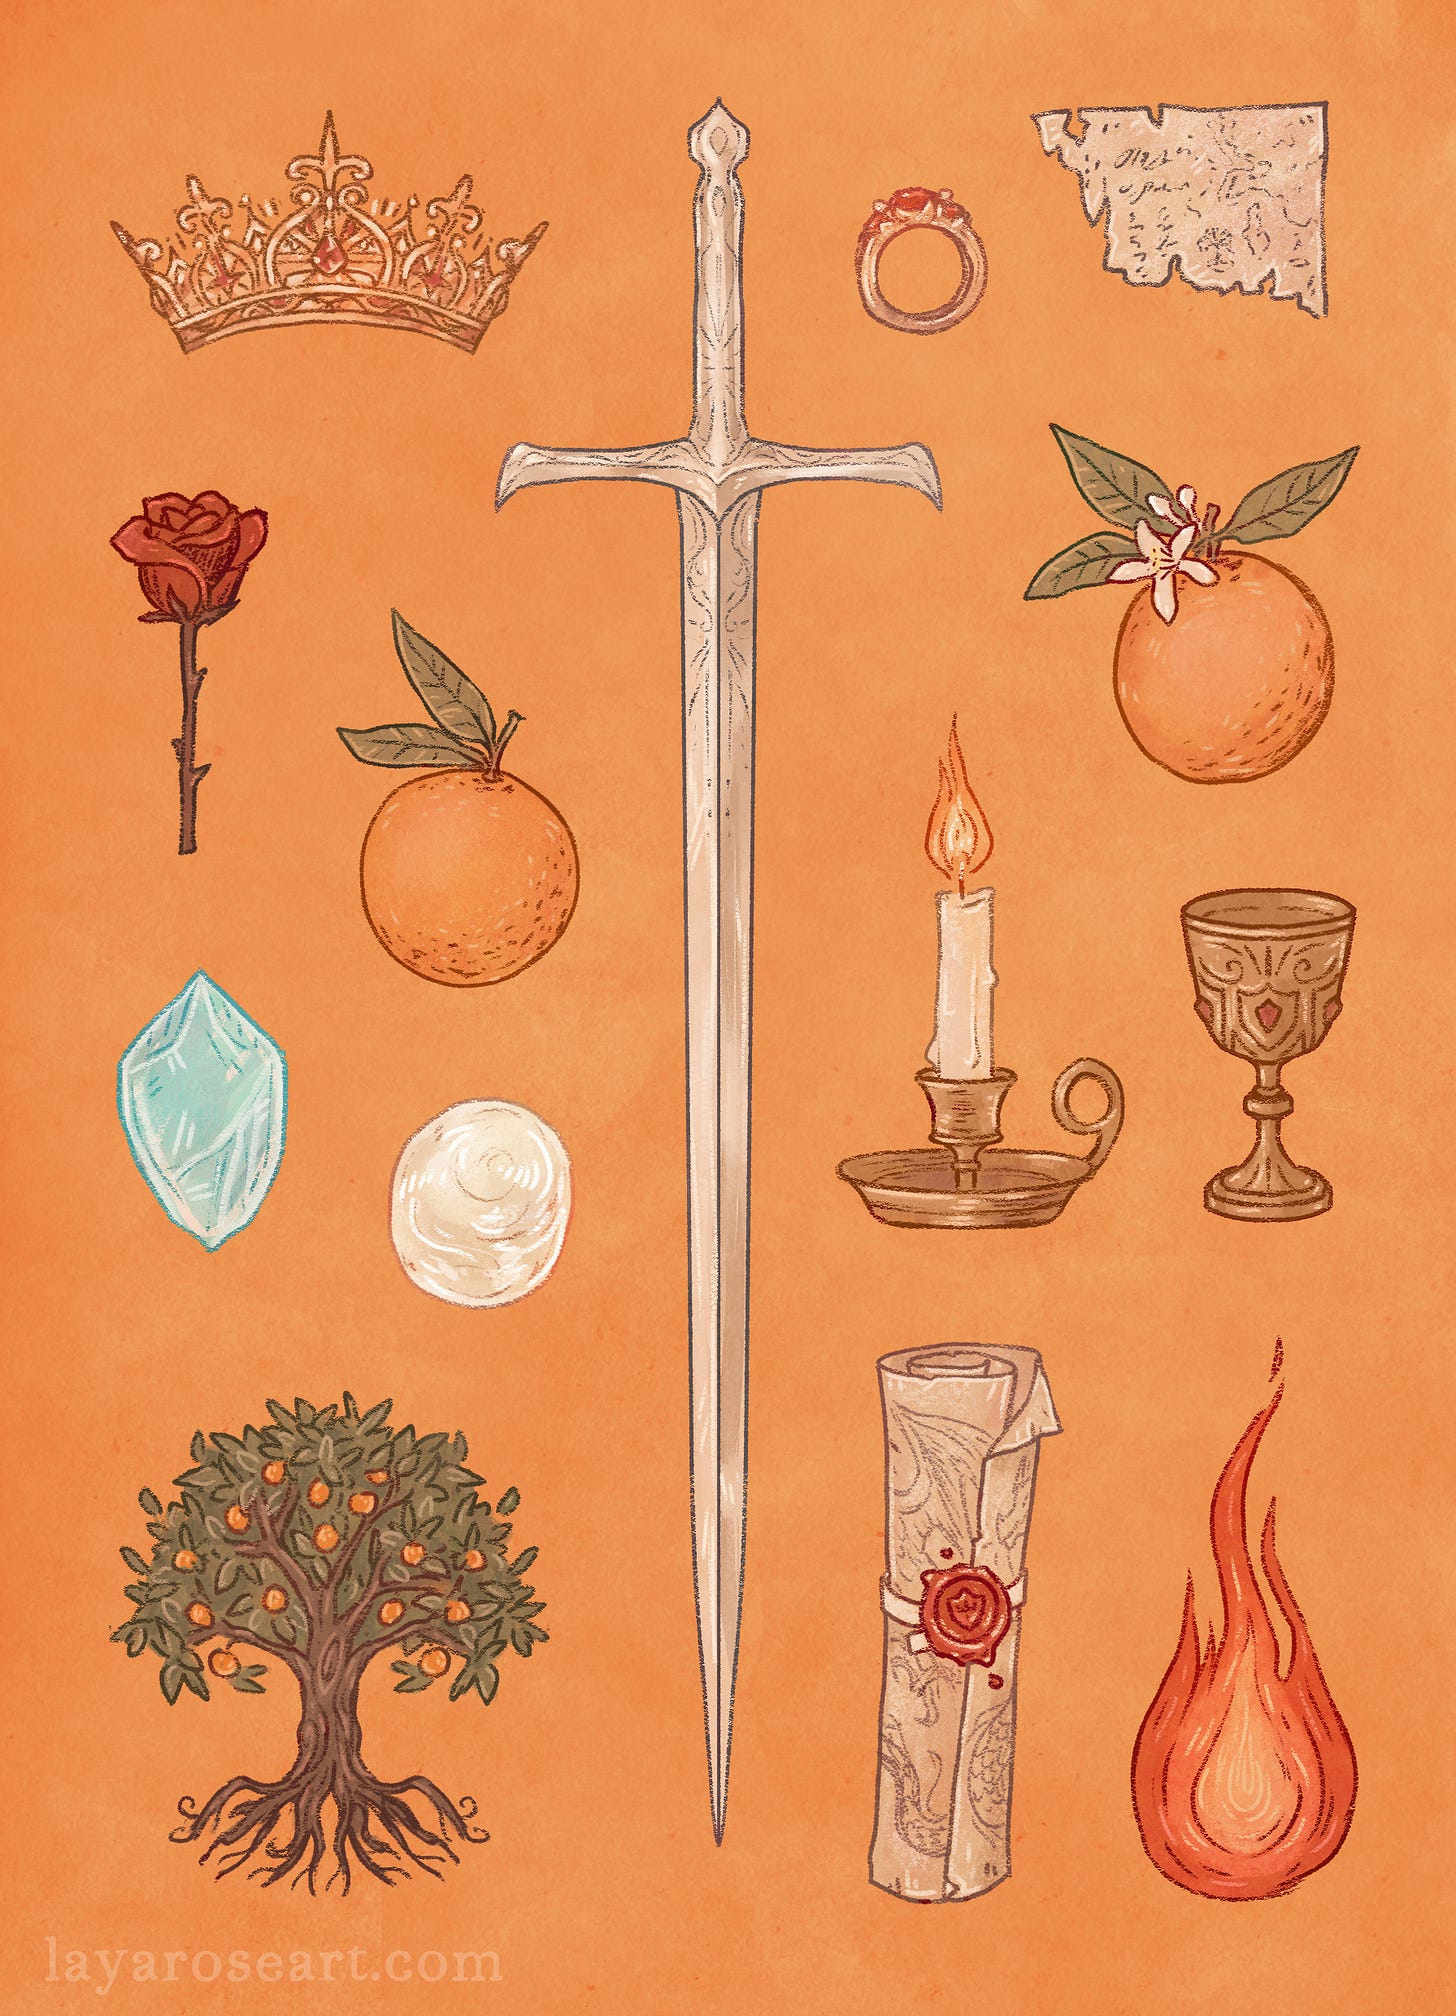 illustration of a bunch of fantasy objects on an orange background, in a flattish textured style. They are, a gold crown, a rose, two oranges, a small ring, a corner scrap of old paper, a long silvery sword, a candle in a candle holder, a grail, a aqua blue scale, a round whitish rock, a scroll with a red seal, an orange flame, and a small orange tree.